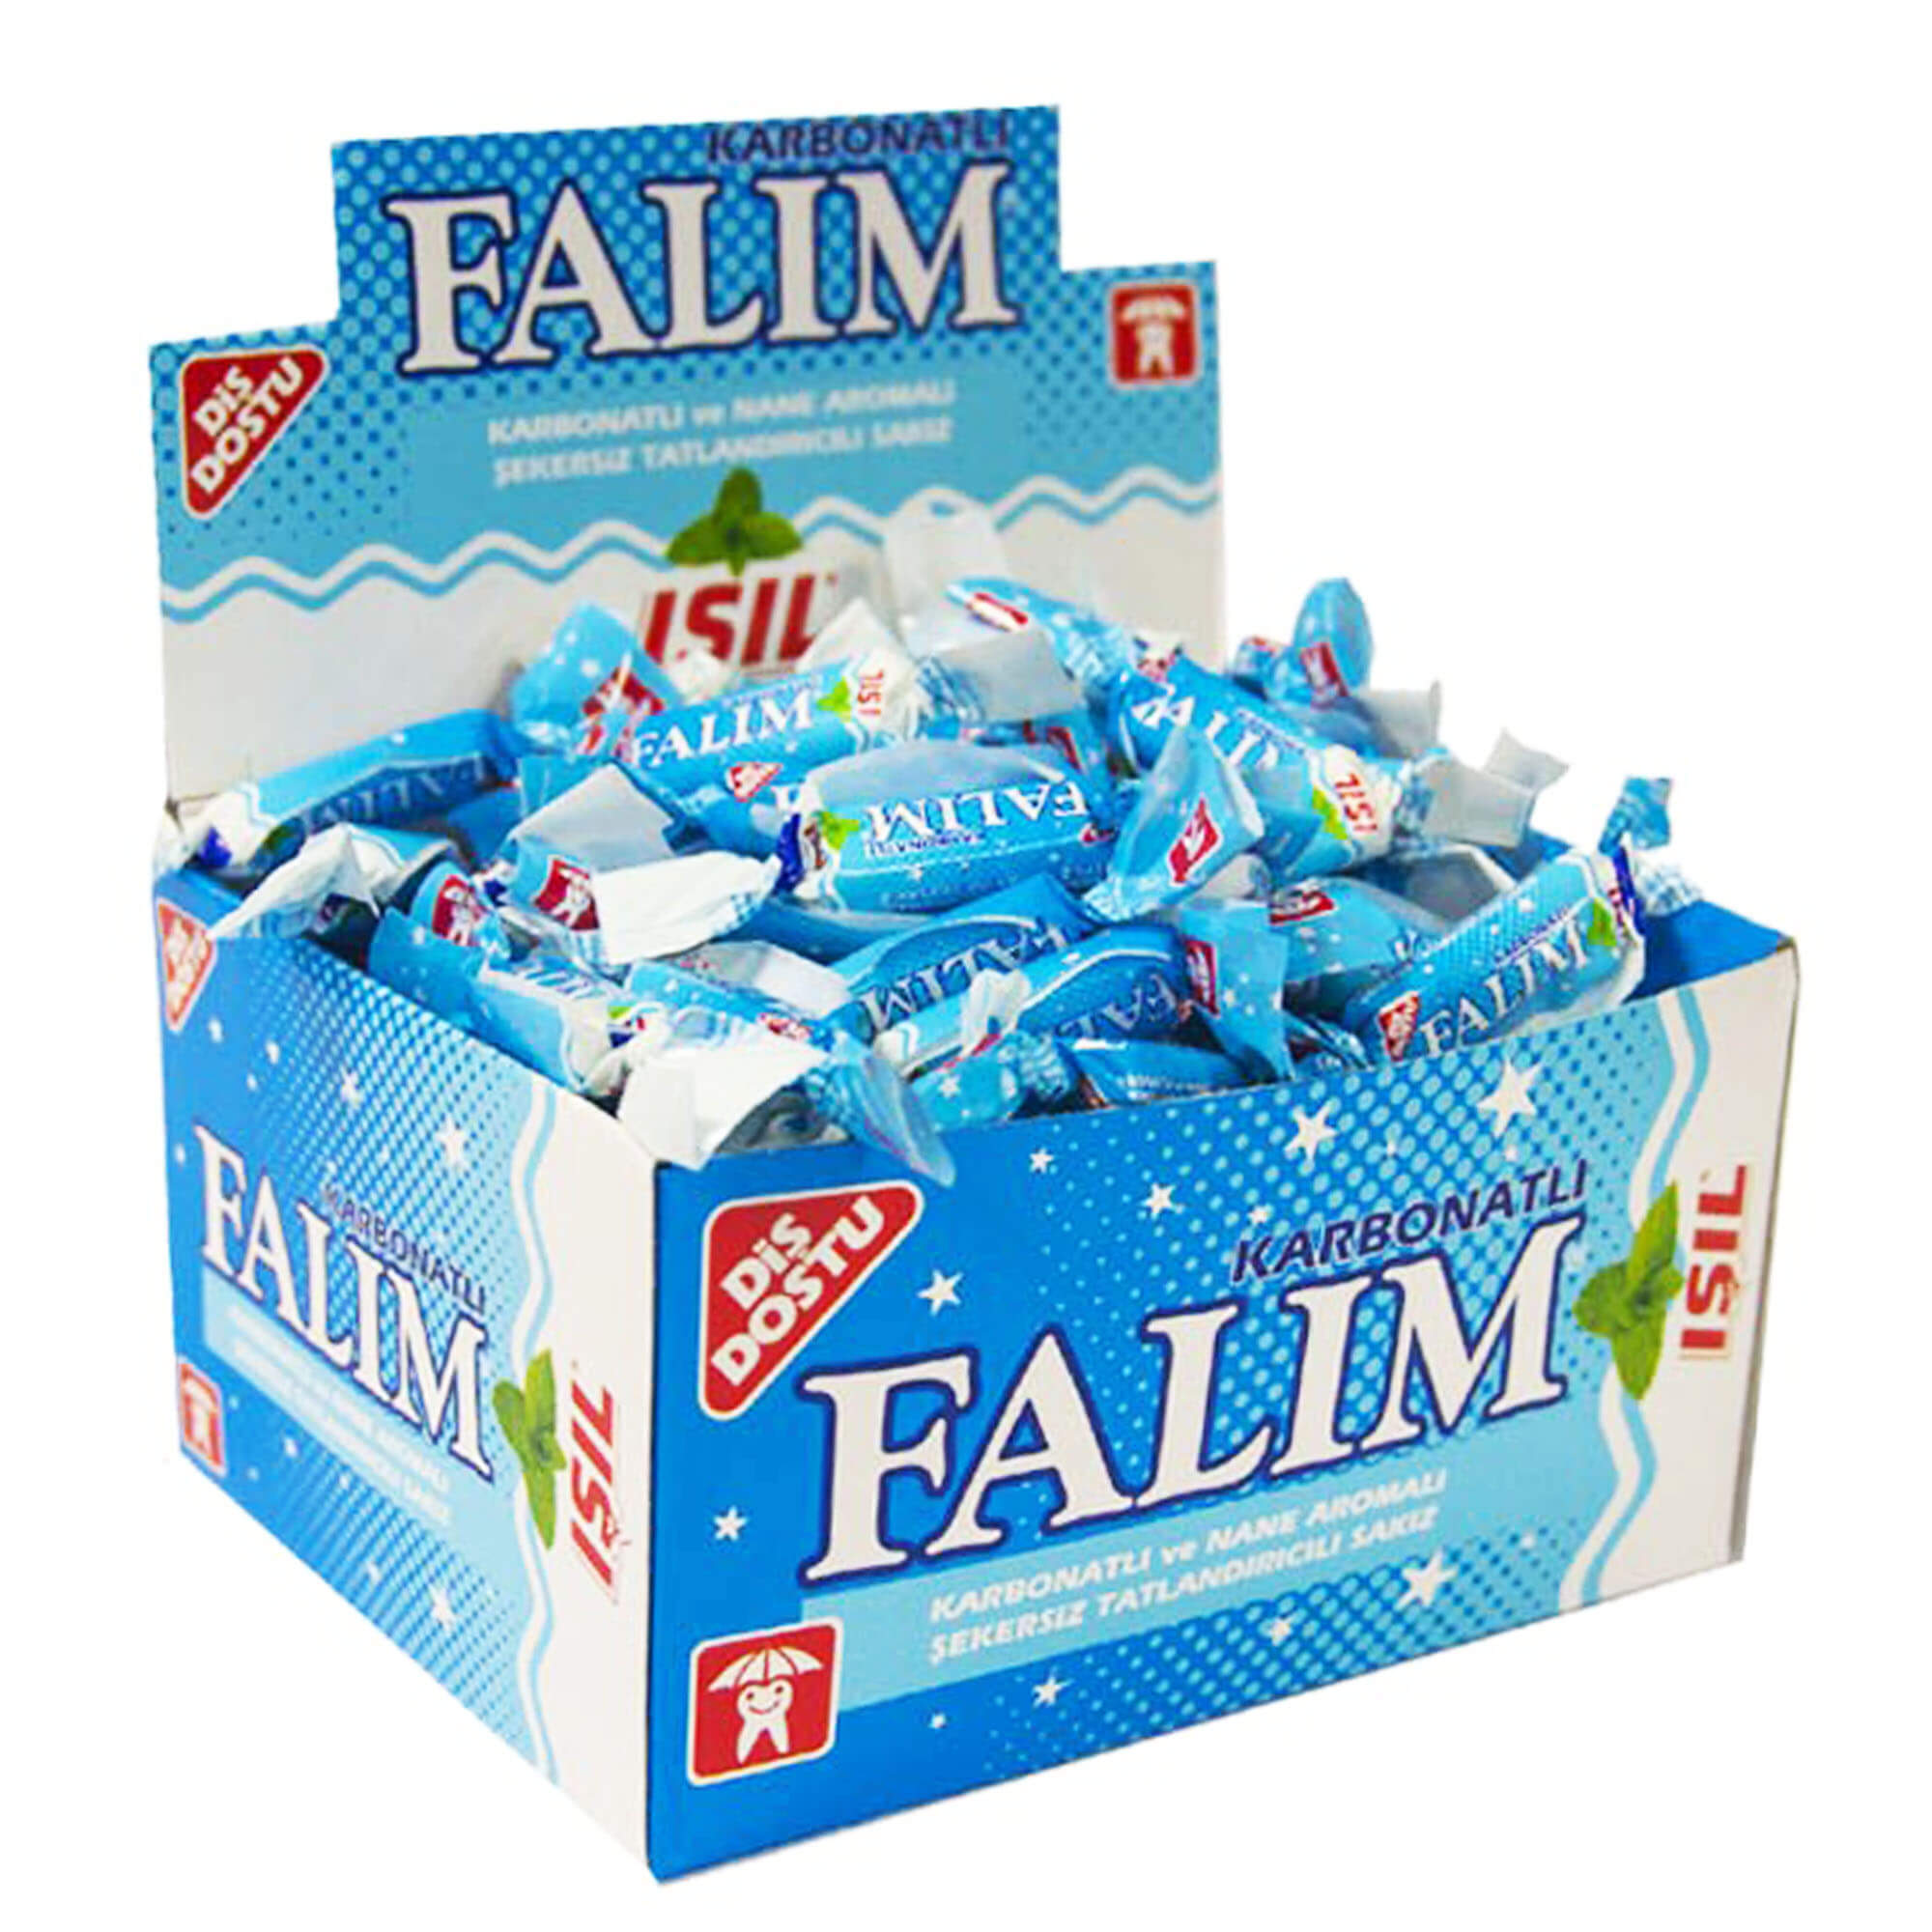 FALIM - FALIM CARBONATED MINT FLAVOURED CHEWING GUM 100 PIECES - 9.99 -  Home Sweet Home